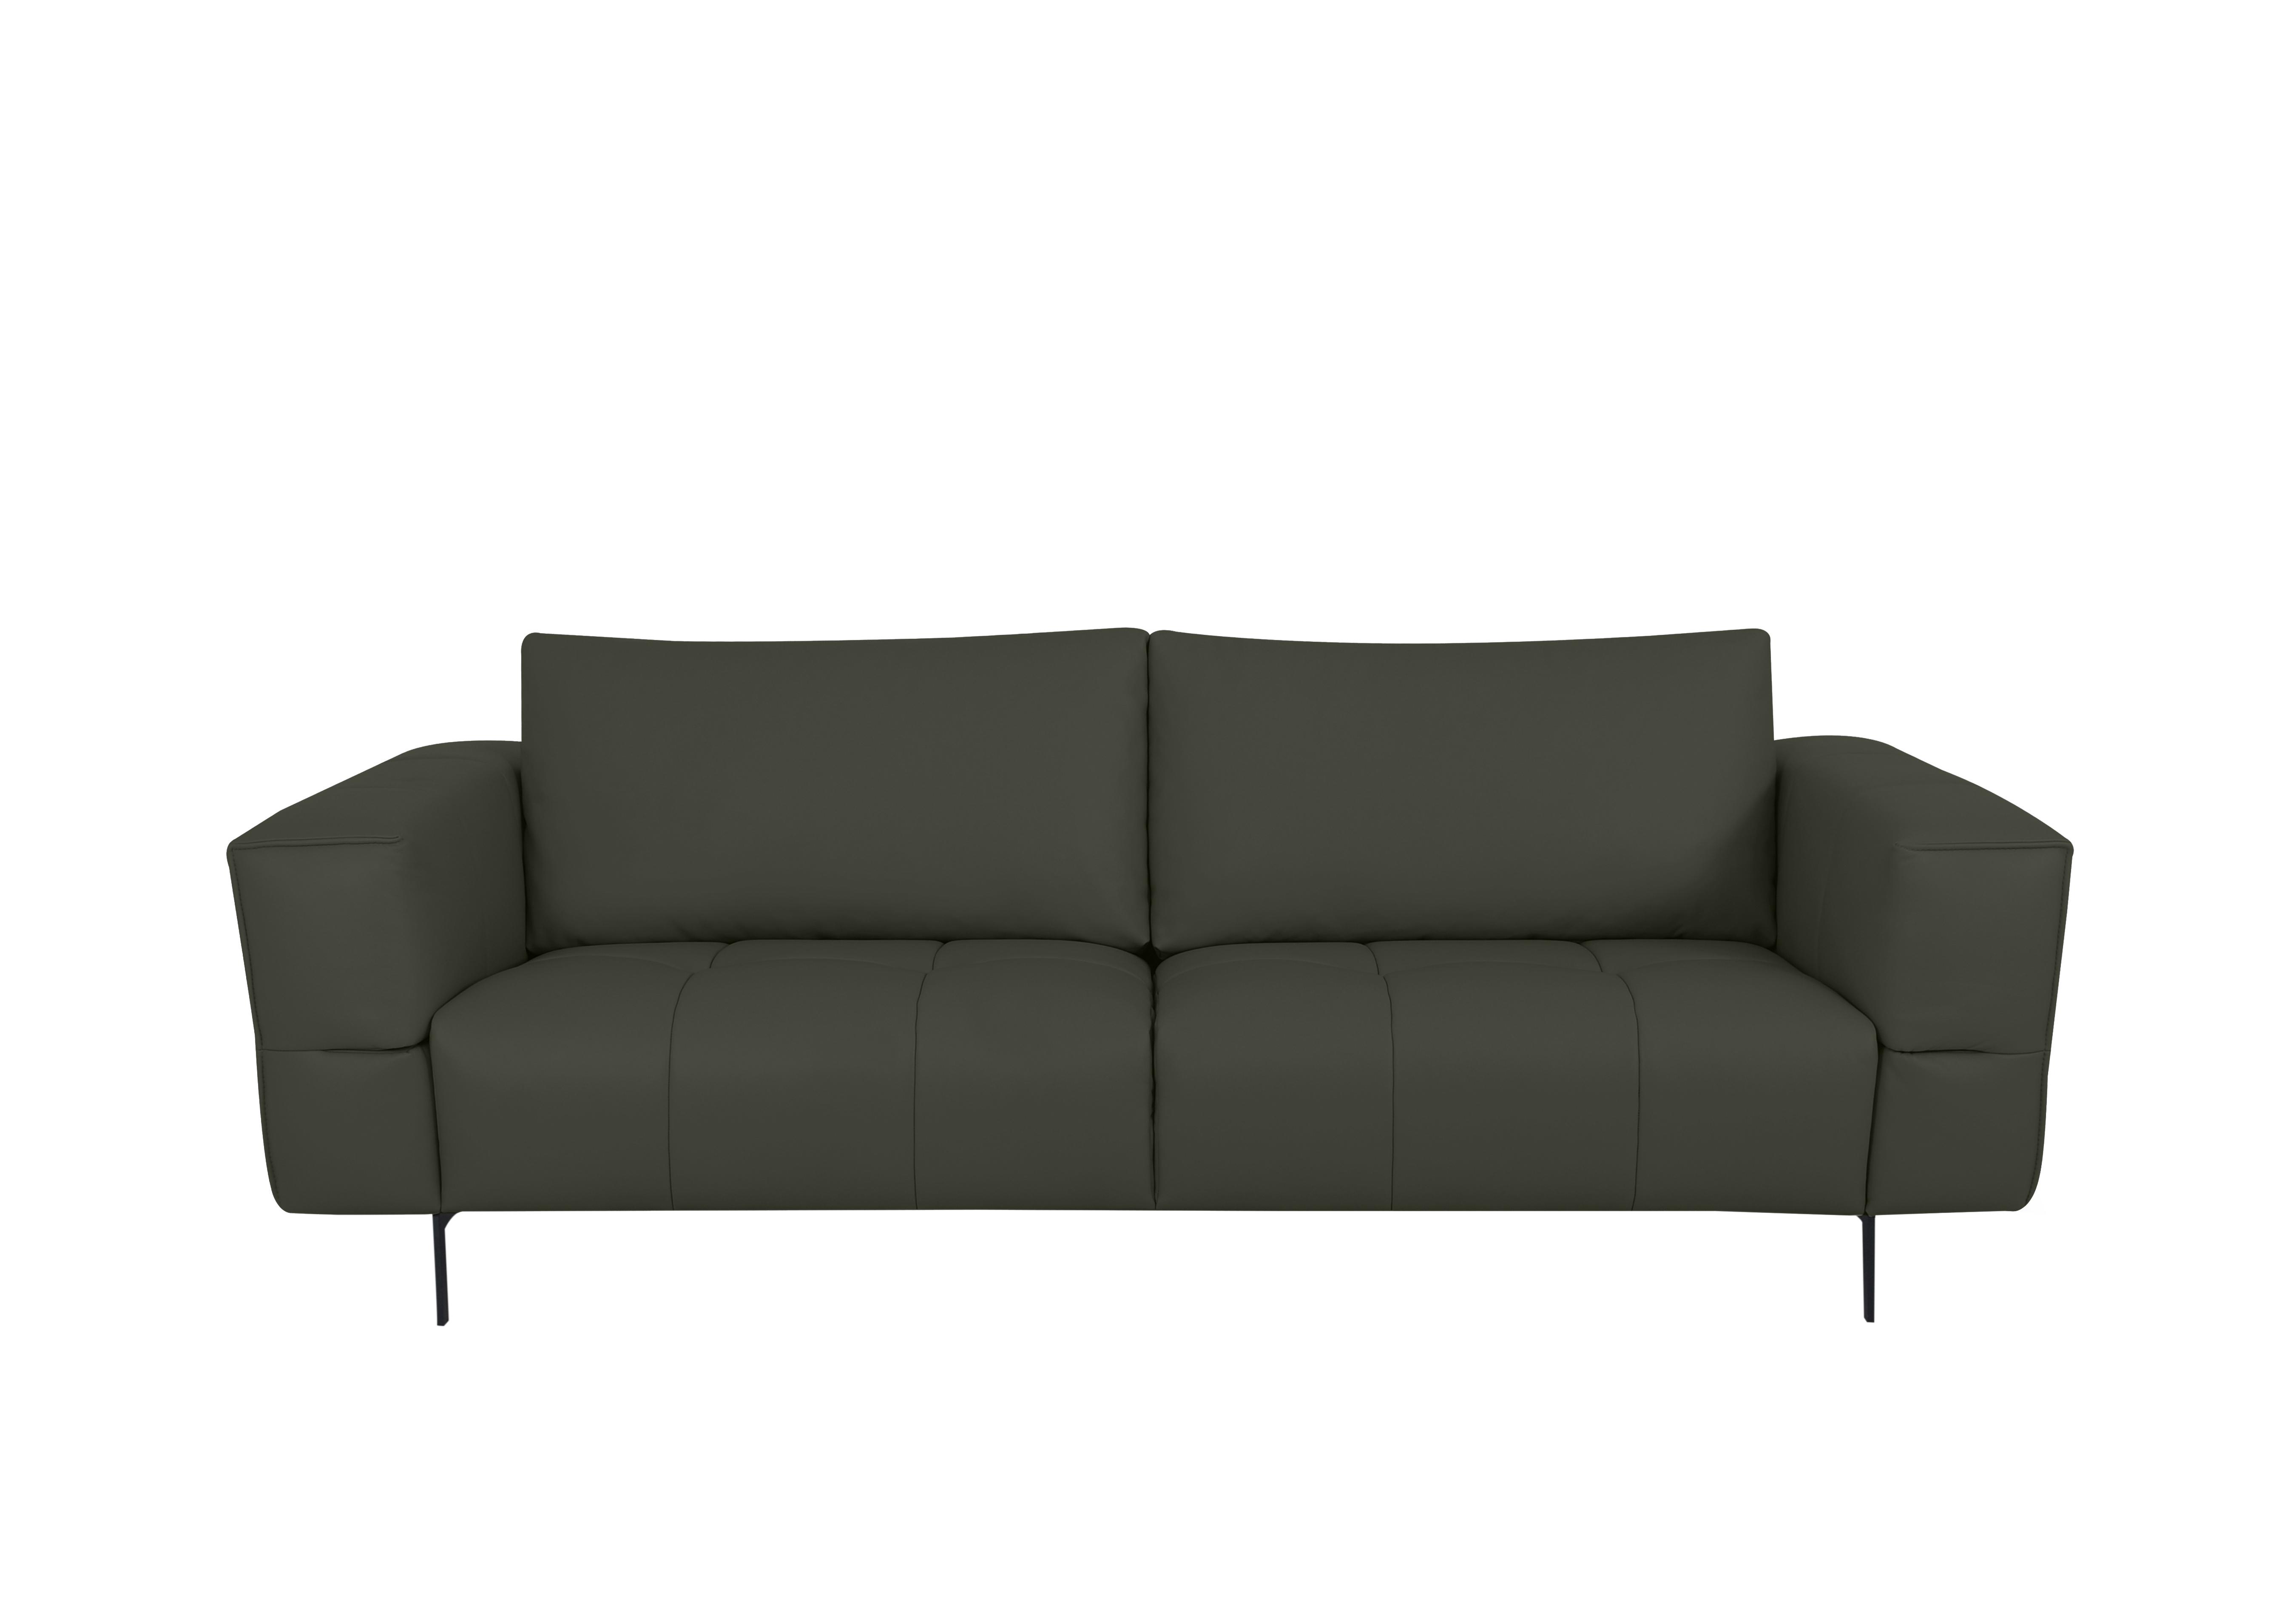 Lawson 3 Seater Leather Sofa in Np-548e Dark Olive on Furniture Village